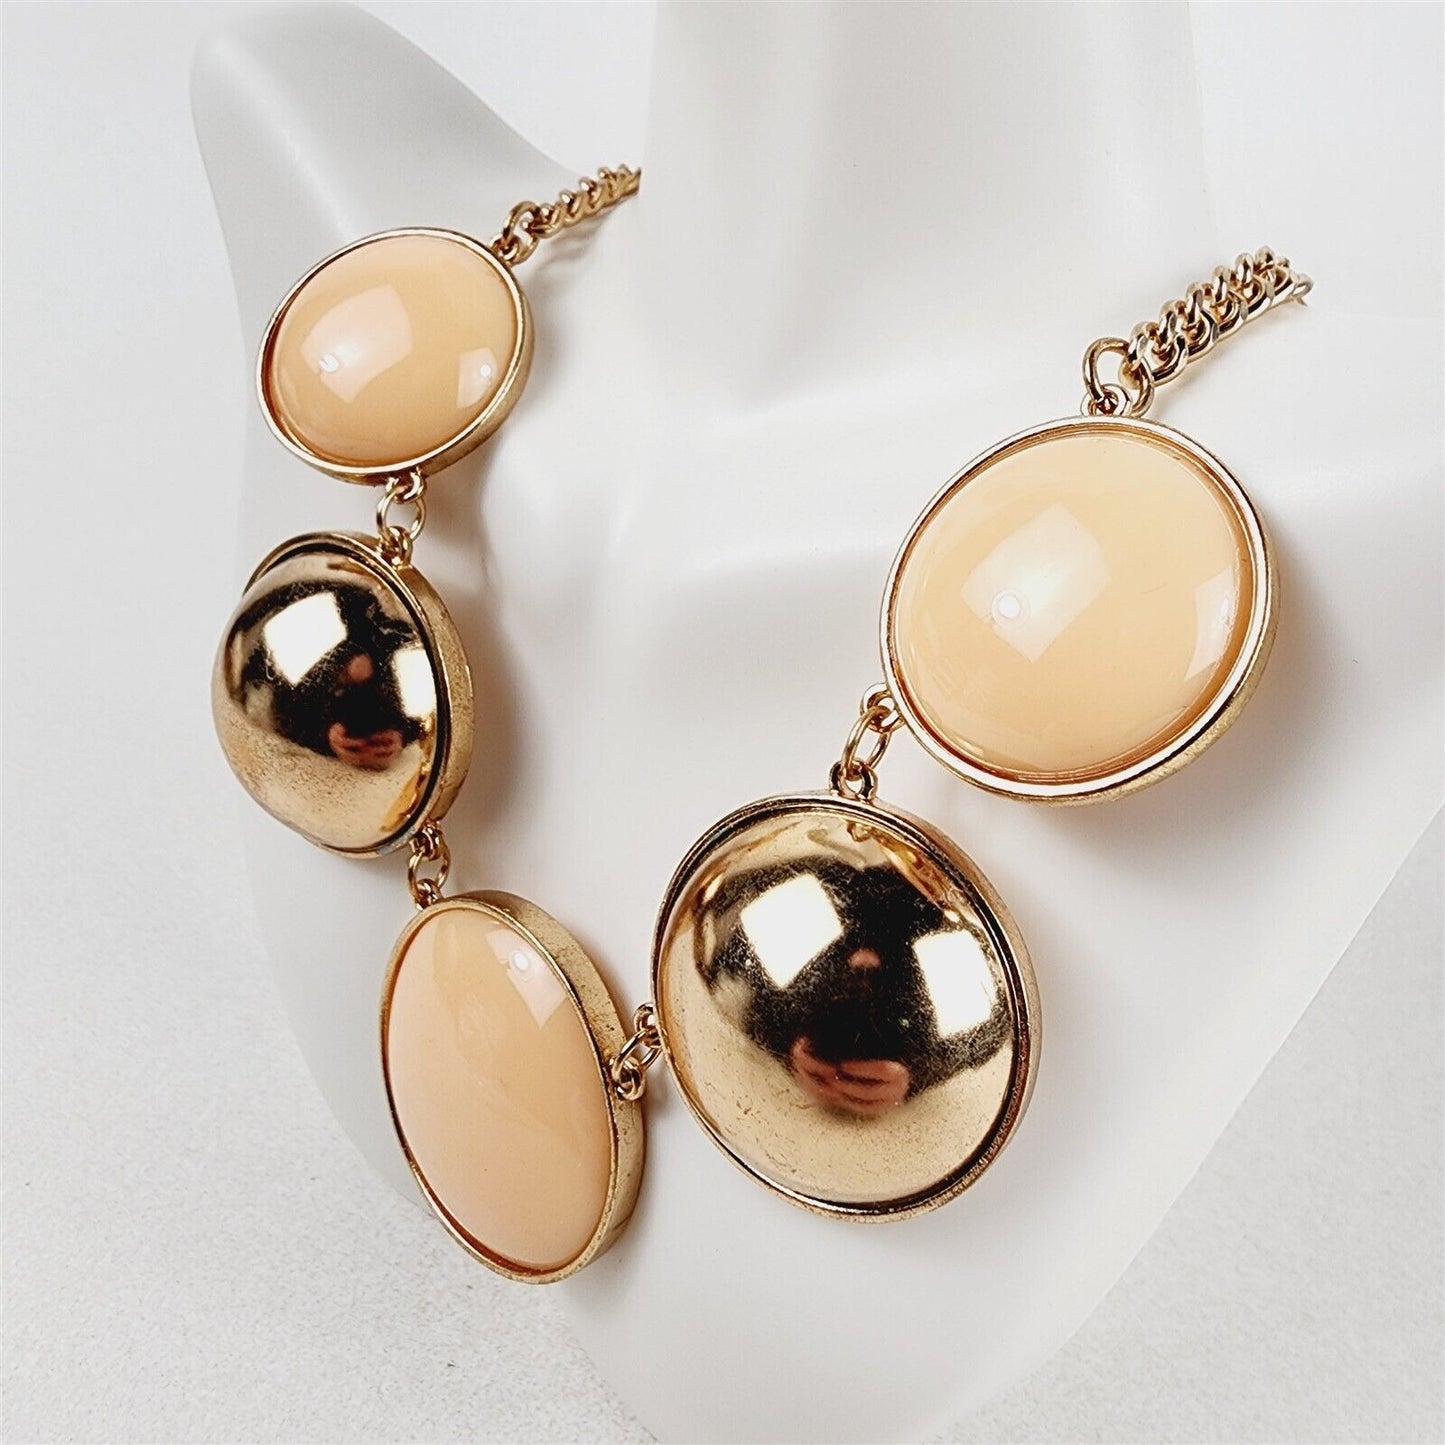 Gold & Pink Round Dome Necklace Earrings Fashion Jewelry Set